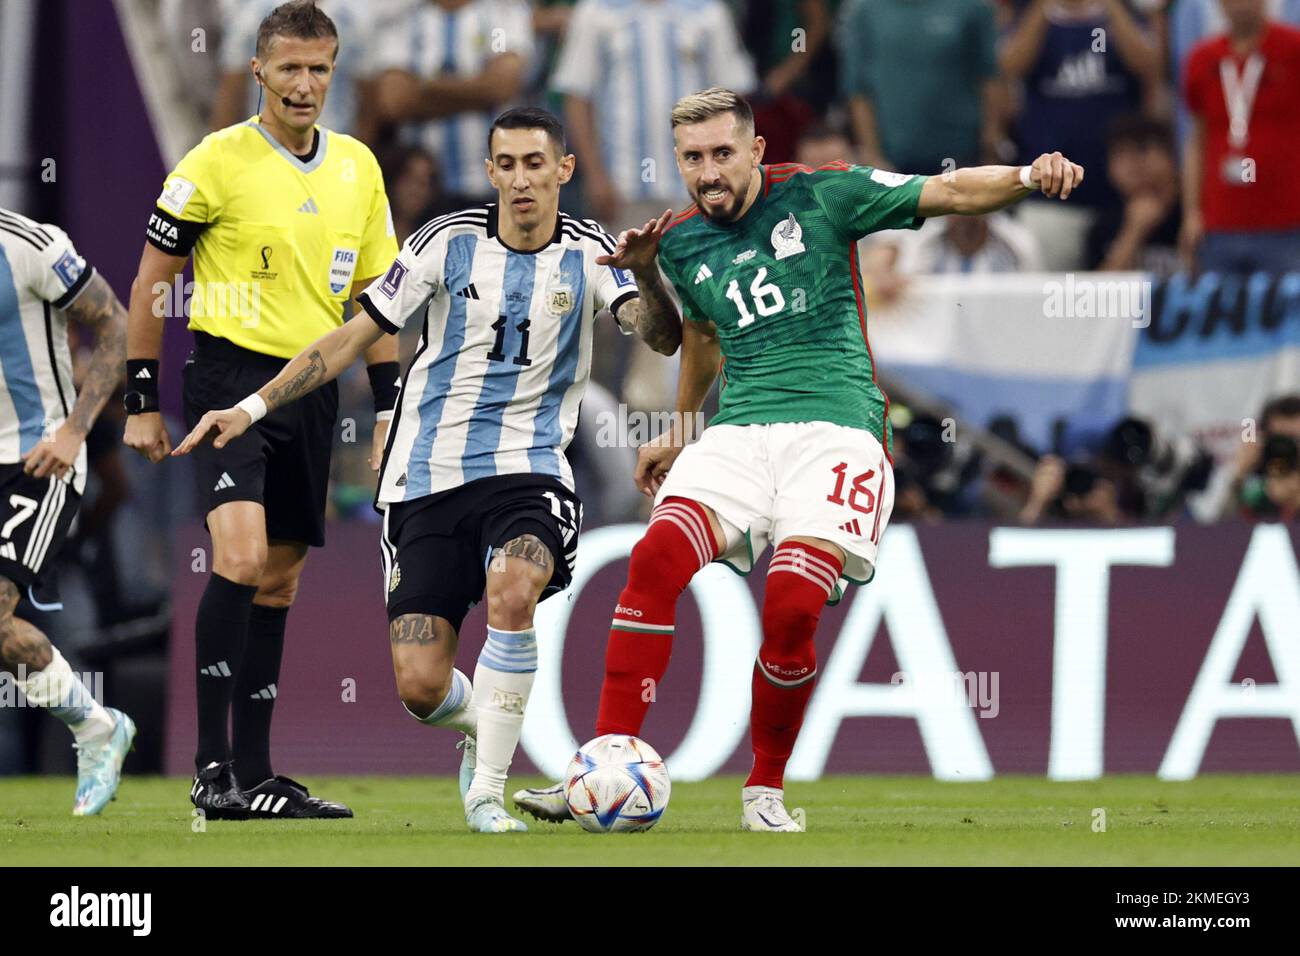 LUSAIL CITY - (lr)Referee Daniele Orsato, Angel Di Maria of Argentina, Hector Herrera of Mexico during the FIFA World Cup Qatar 2022 group C match between Argentina and Mexico at Lusail Stadium on November 26, 2022 in Lusail City, Qatar. AP | Dutch Height | MAURICE OF STONE Stock Photo